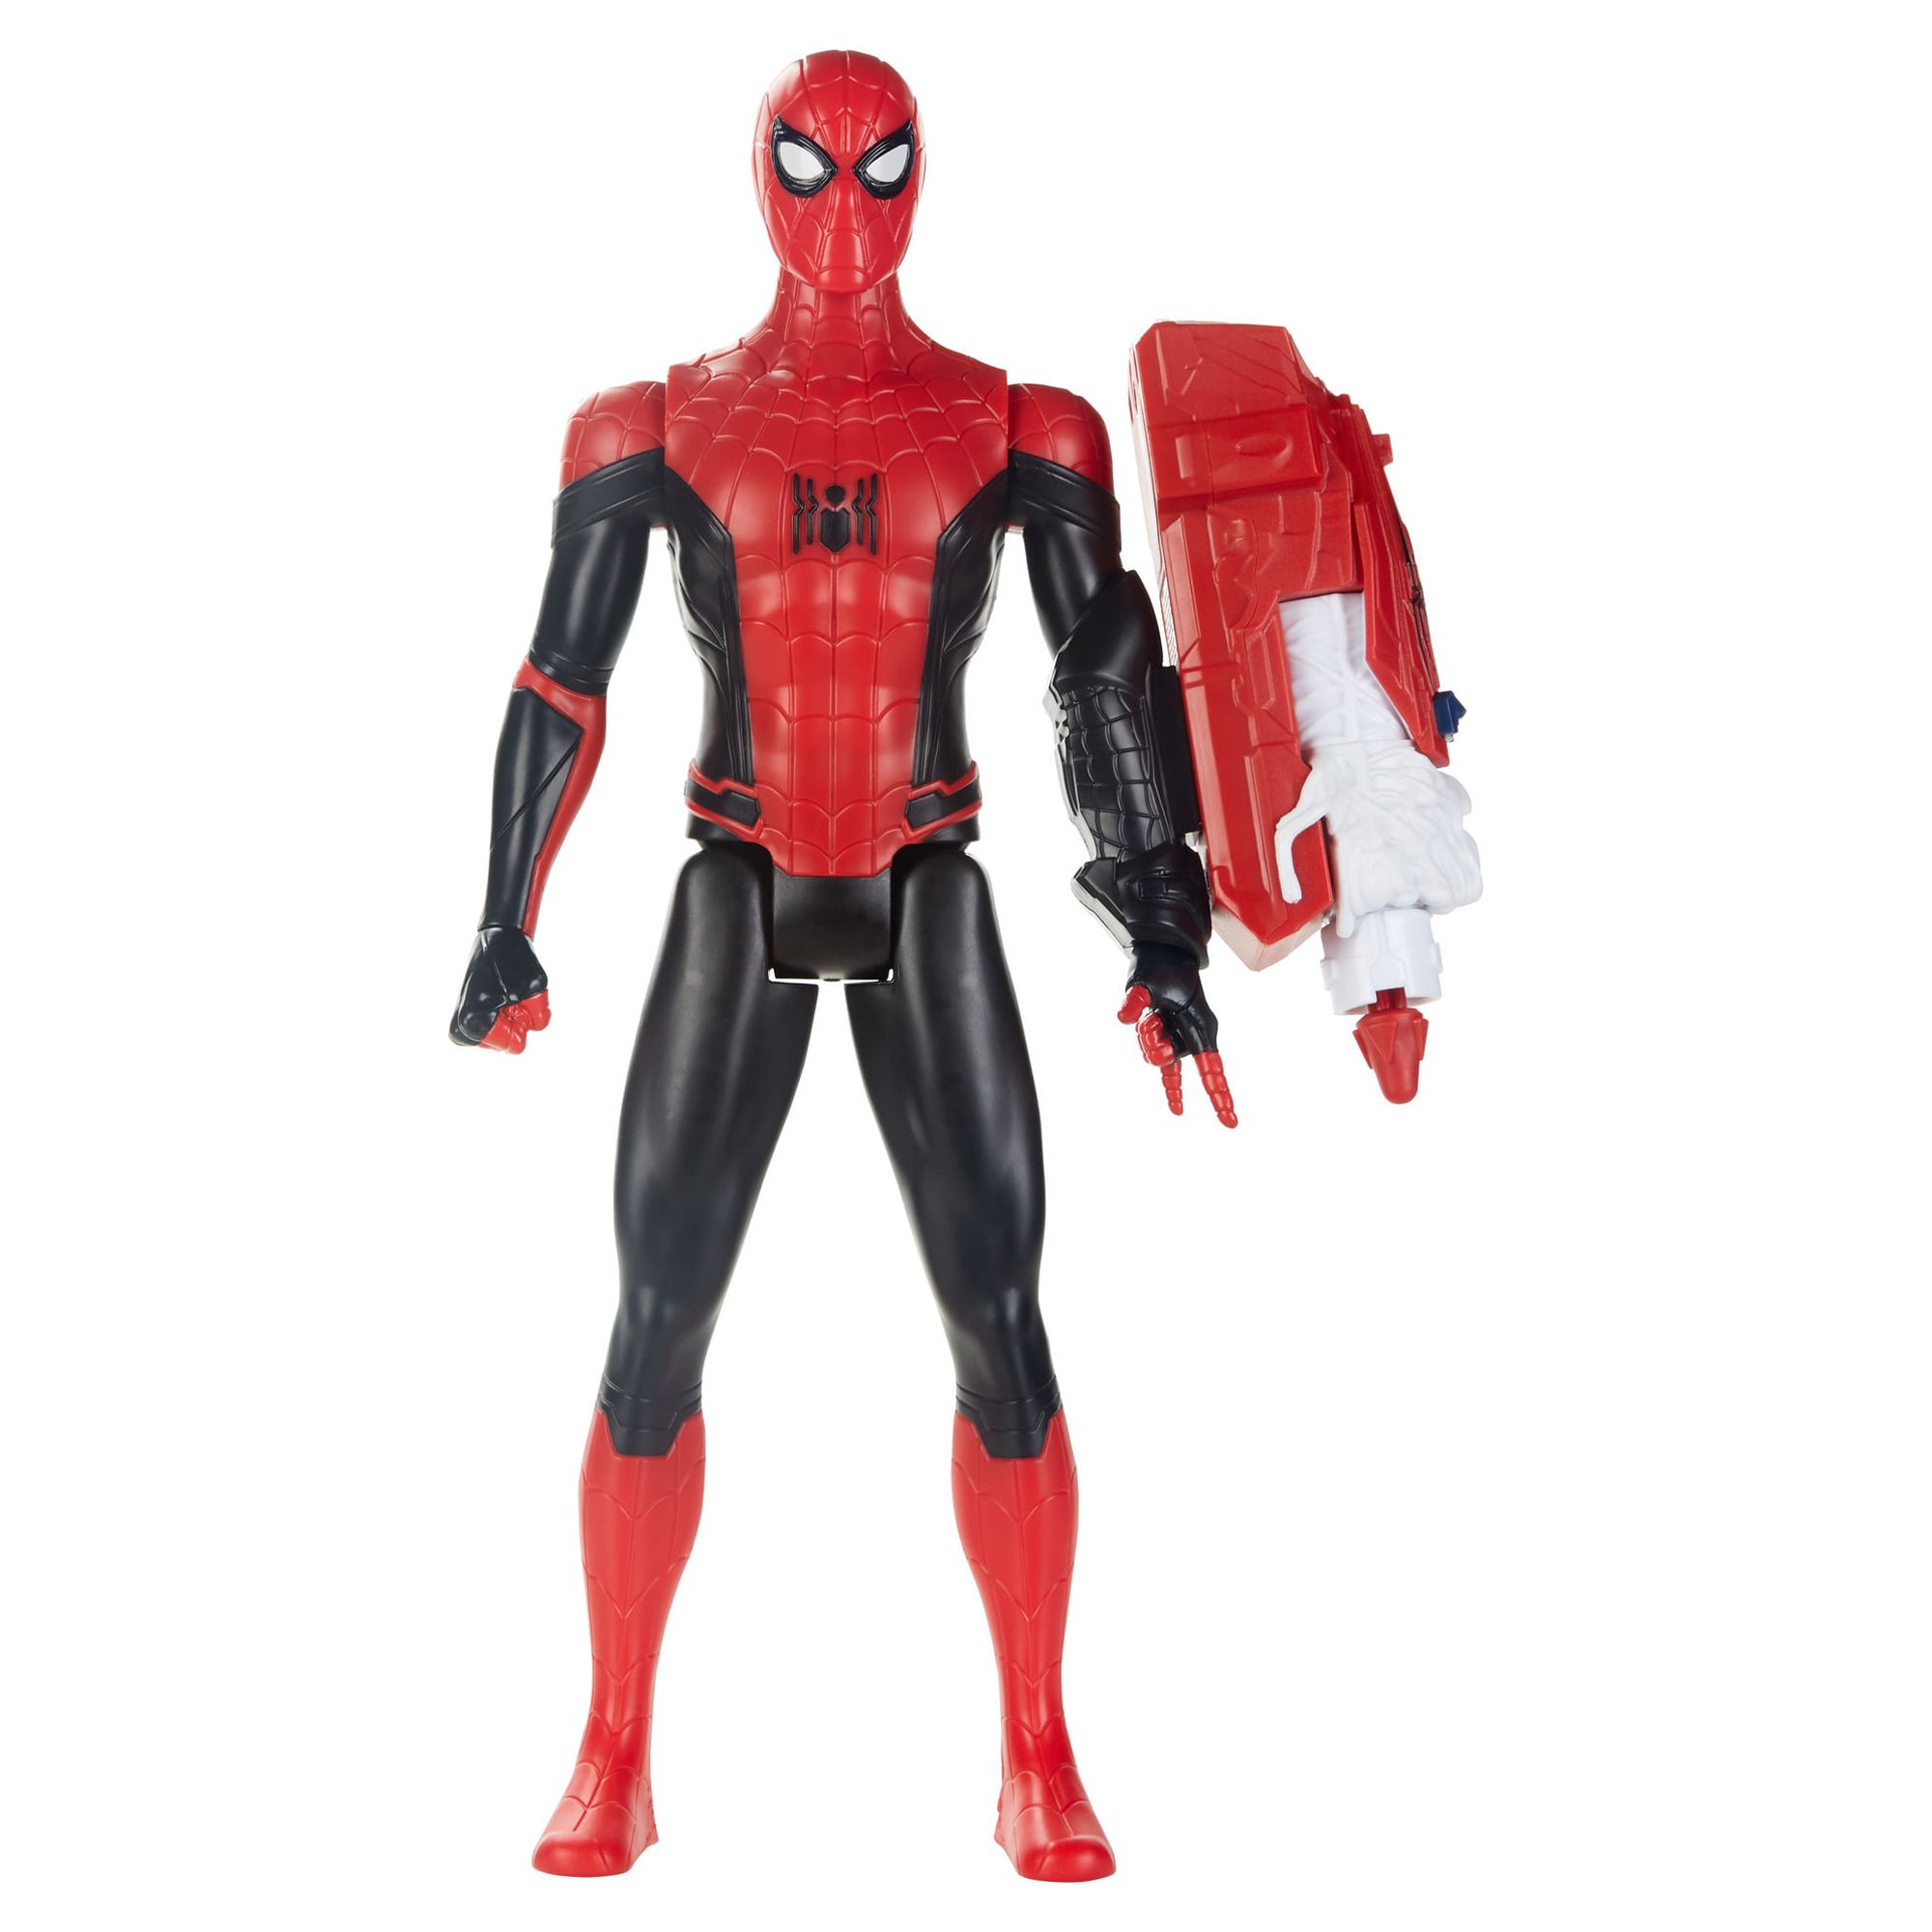 Spider-Man Far from Home Titan Hero Series Figure - image 2 of 7